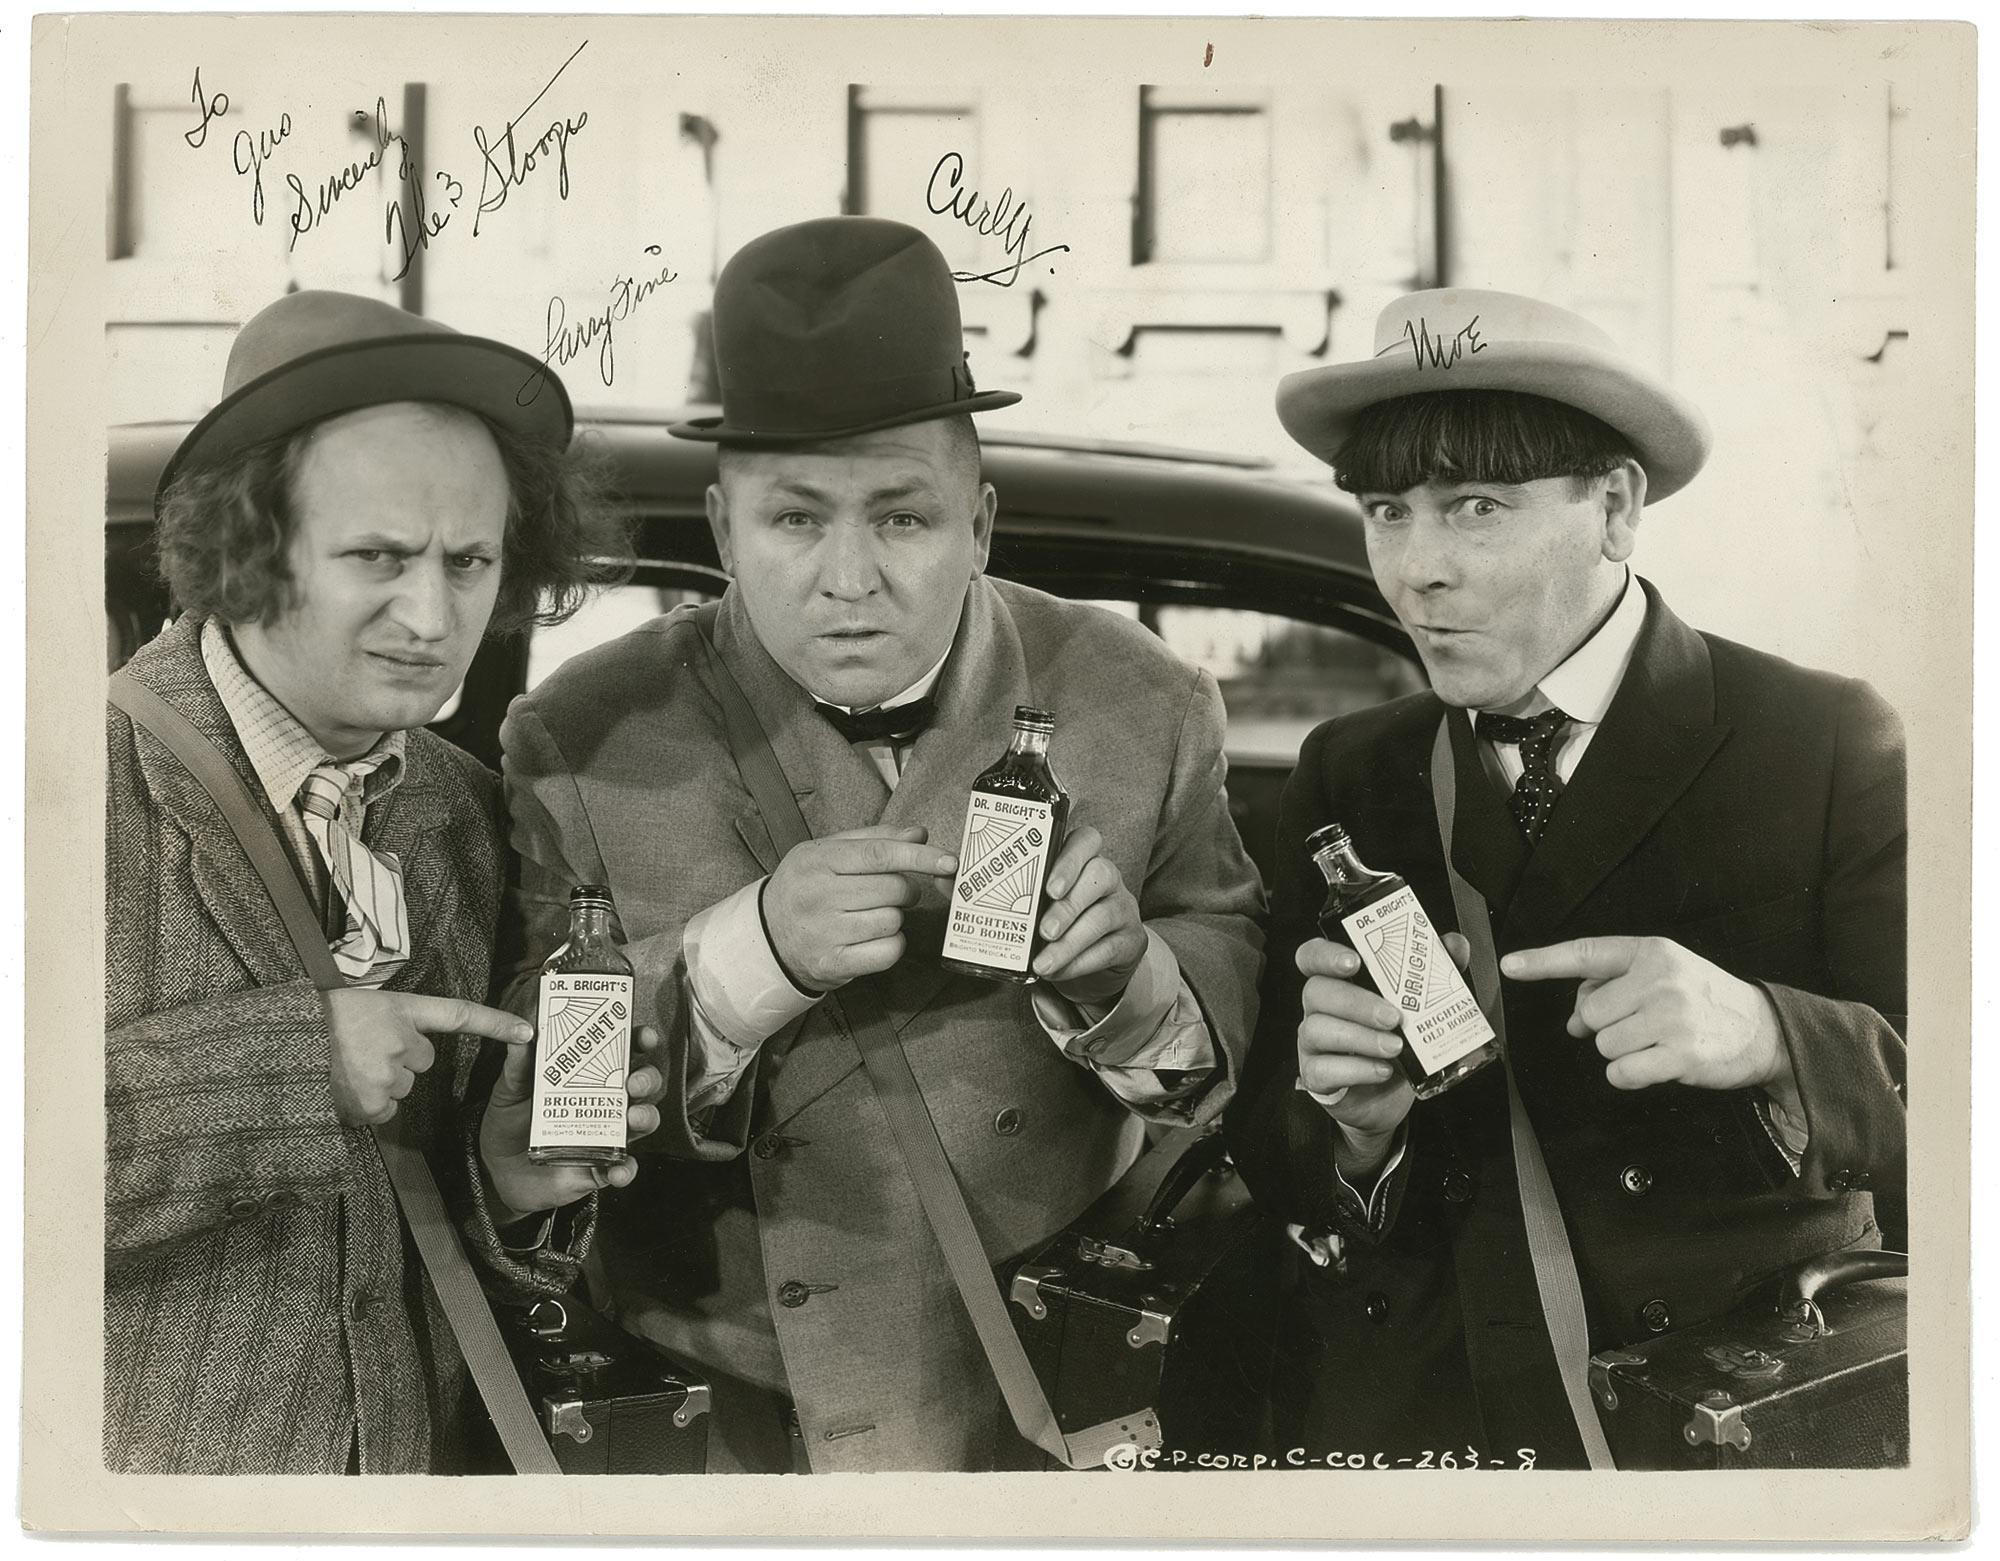 Three Stooges Wallpaper Image And All To